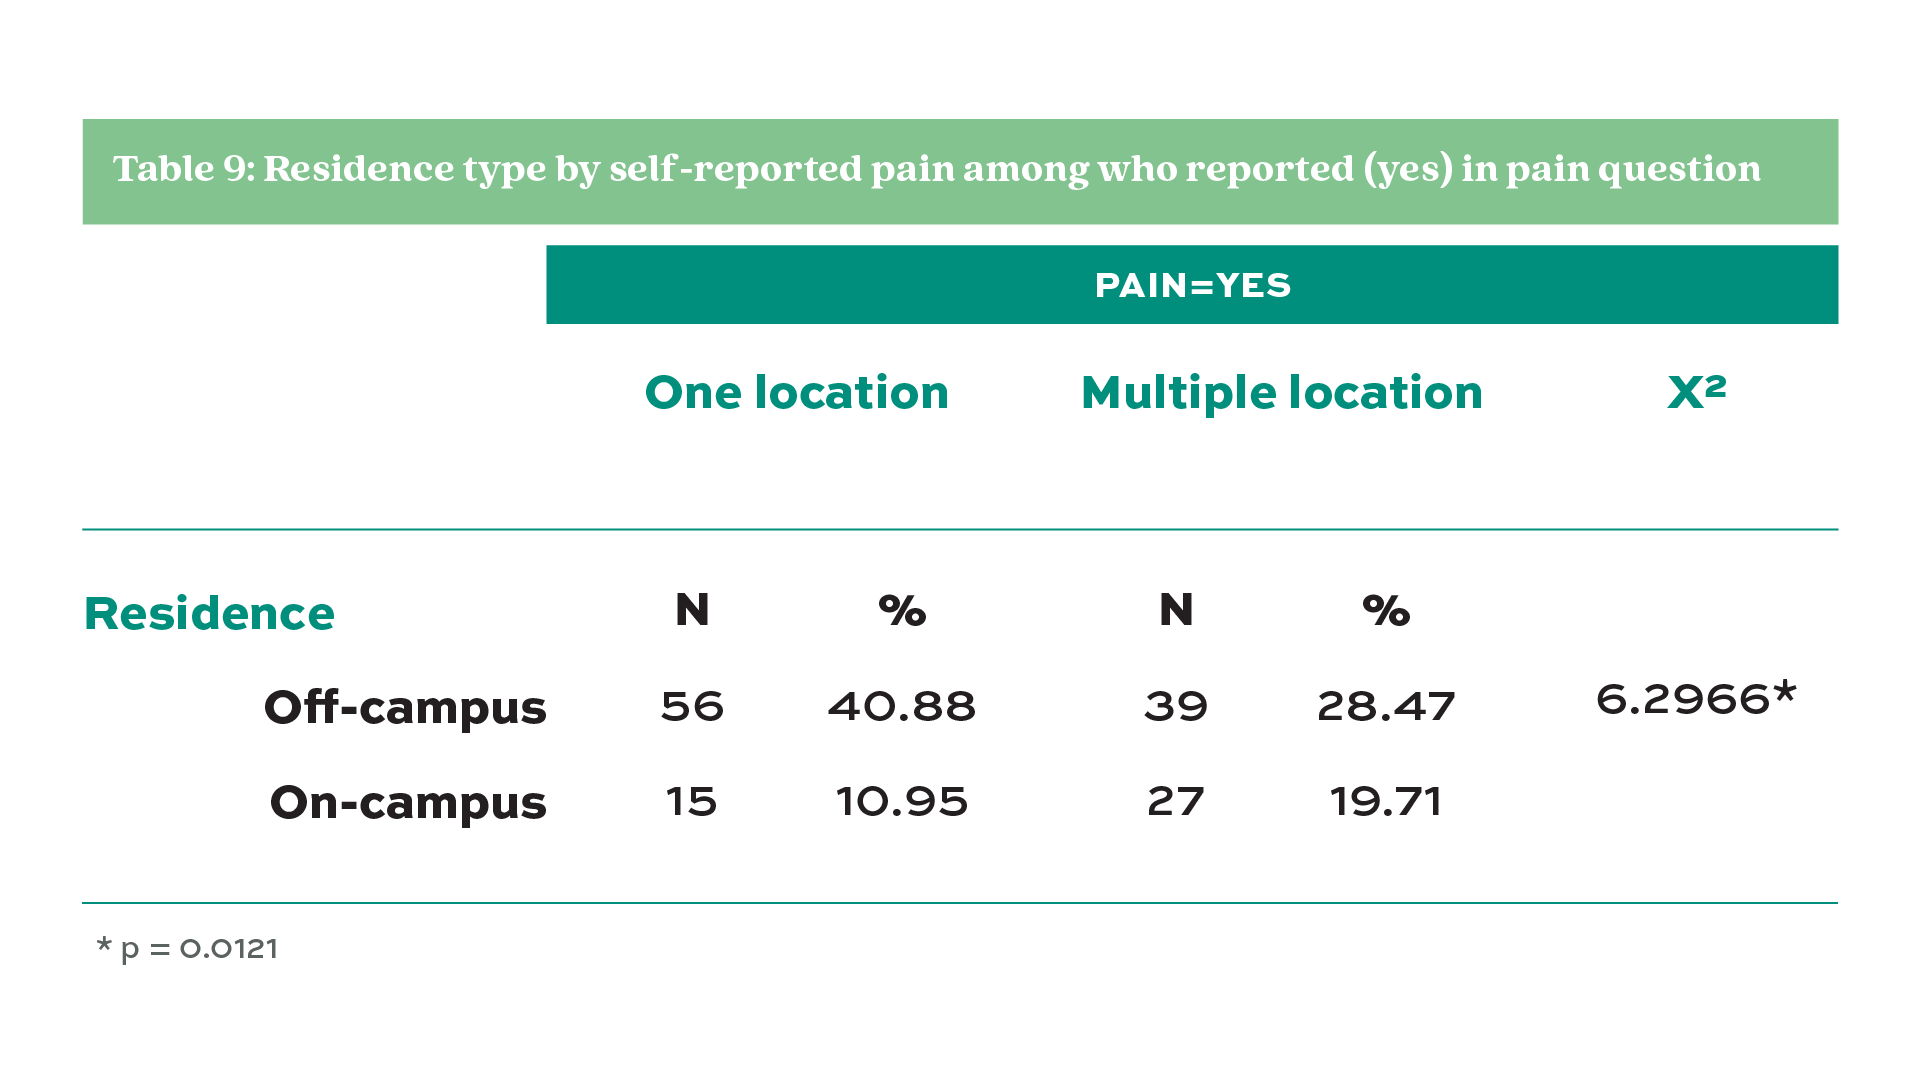 Table 9. Residence type by self-reported pain among who reported (yes) in pain question